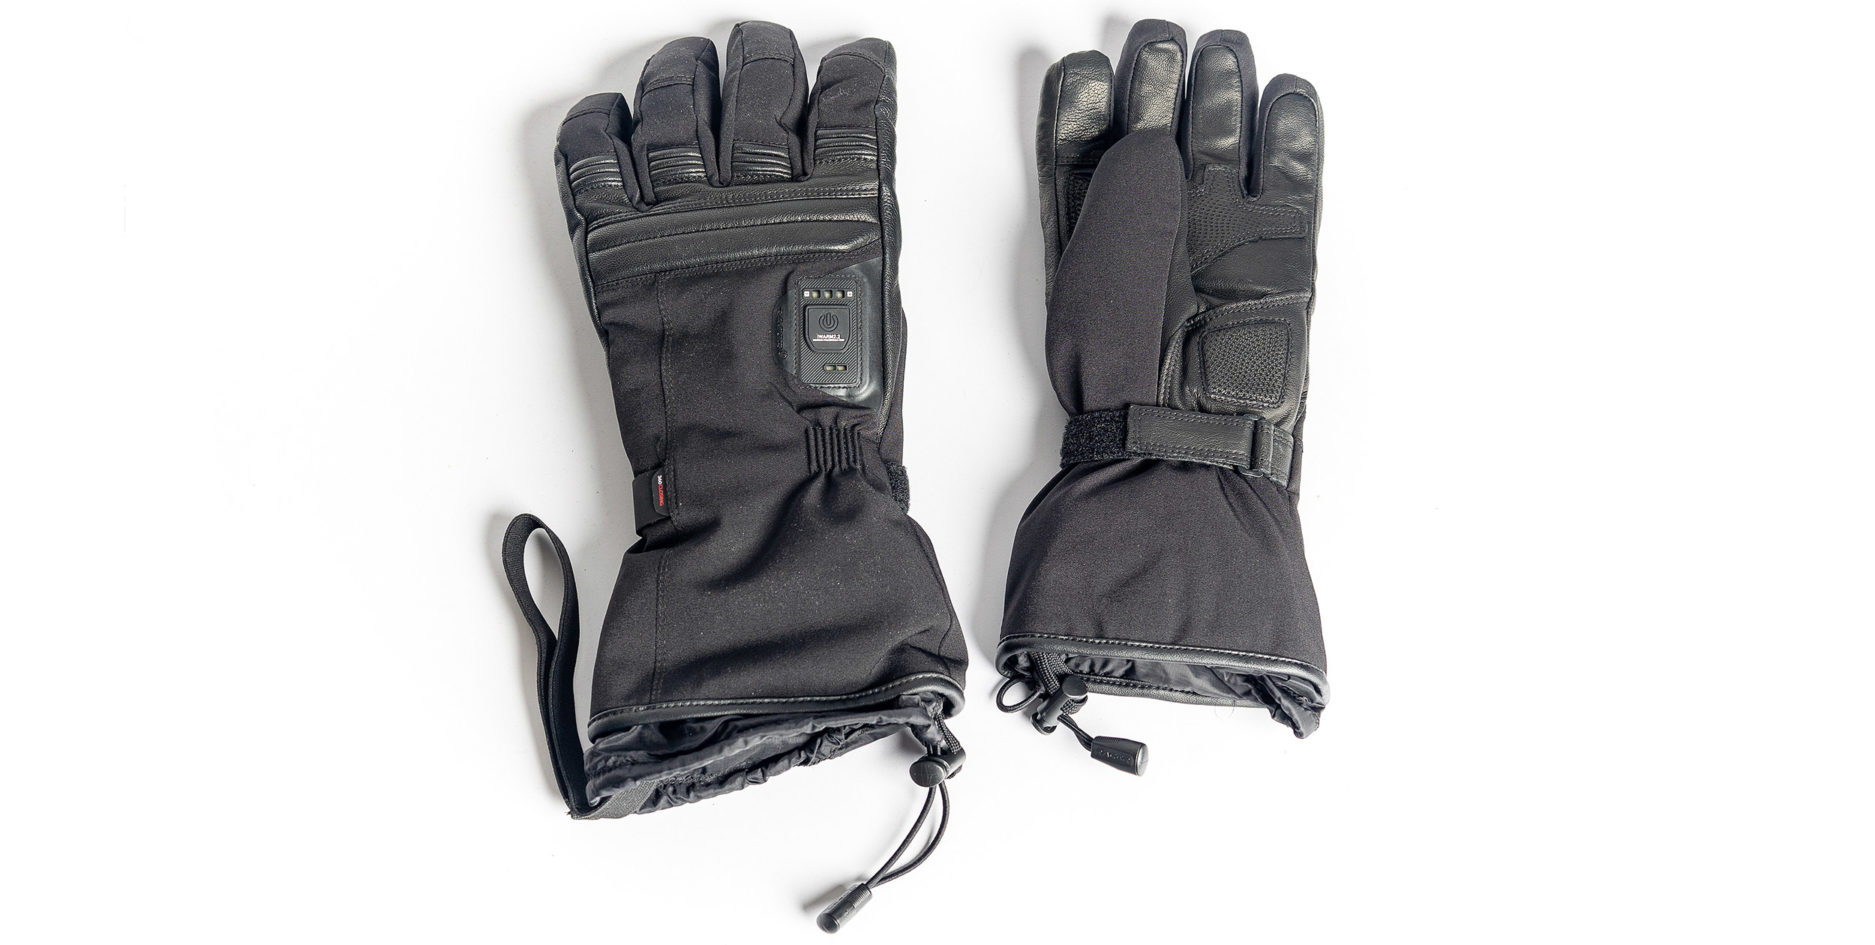 Racer Connectic 4 gloves